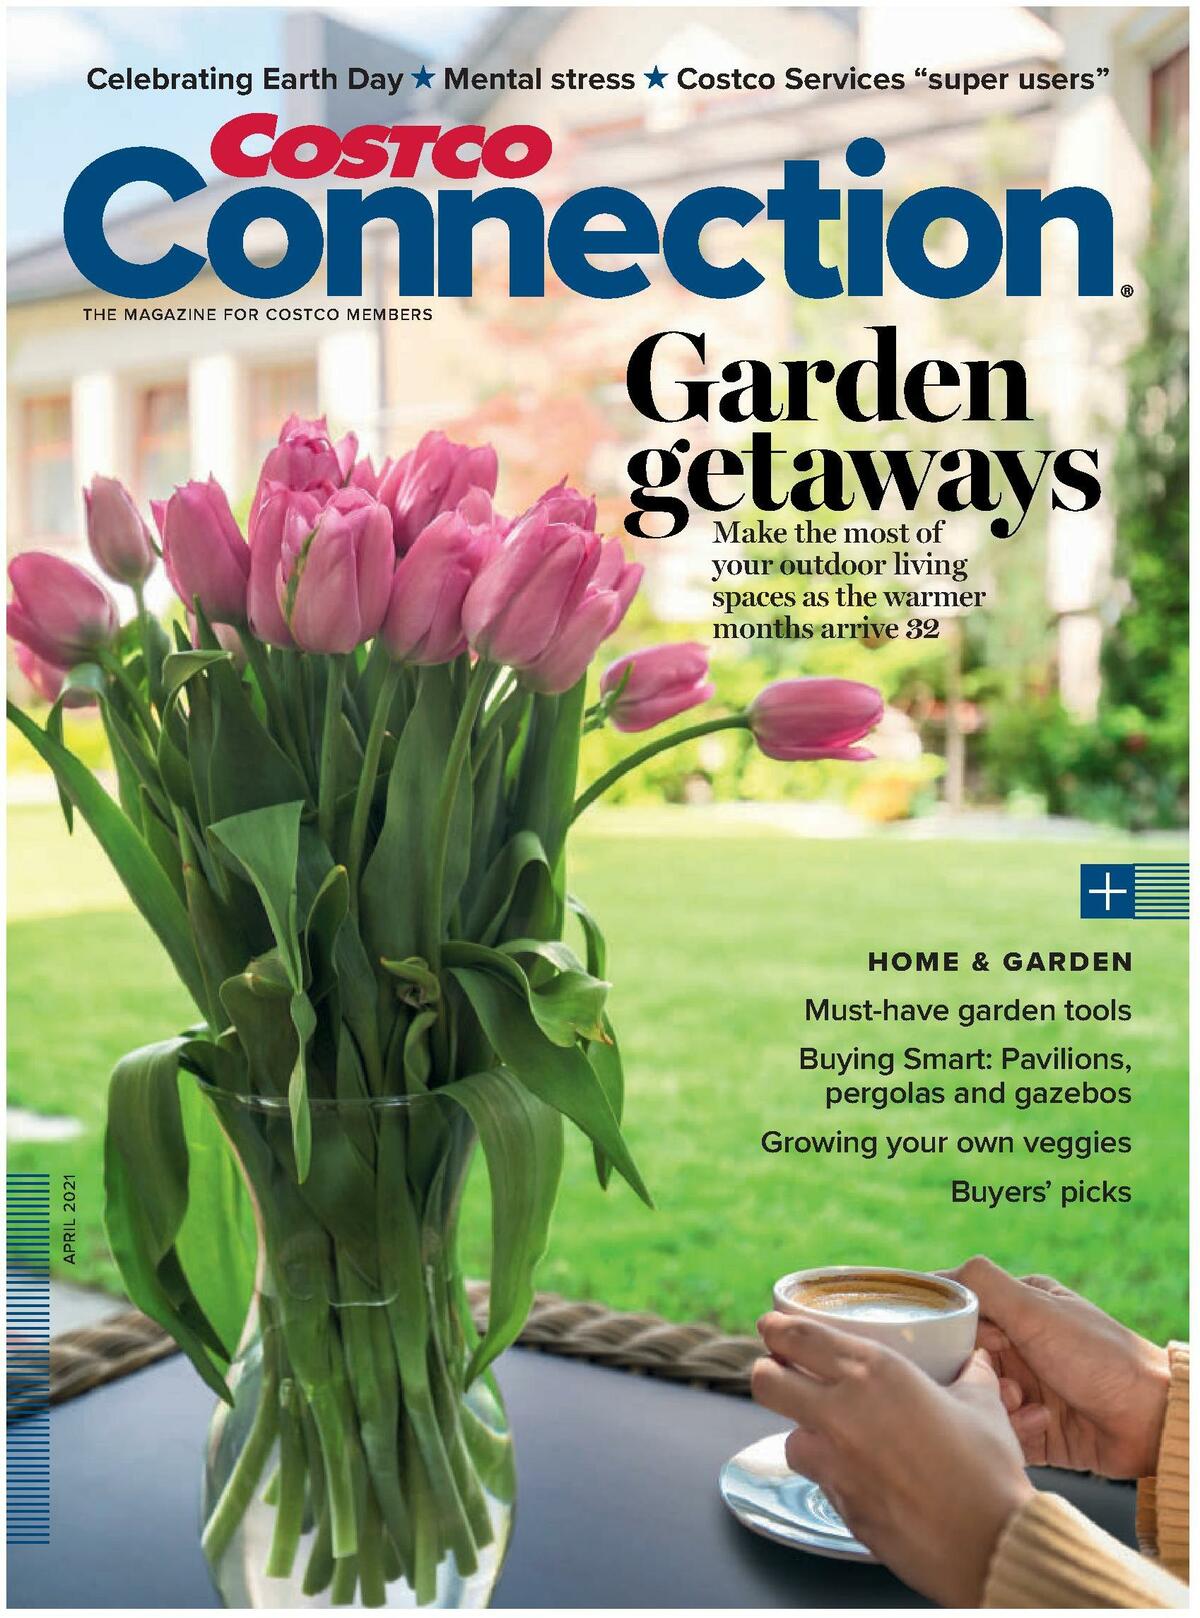 Costco Connection April Special Buys and Warehouse Savings from April 1